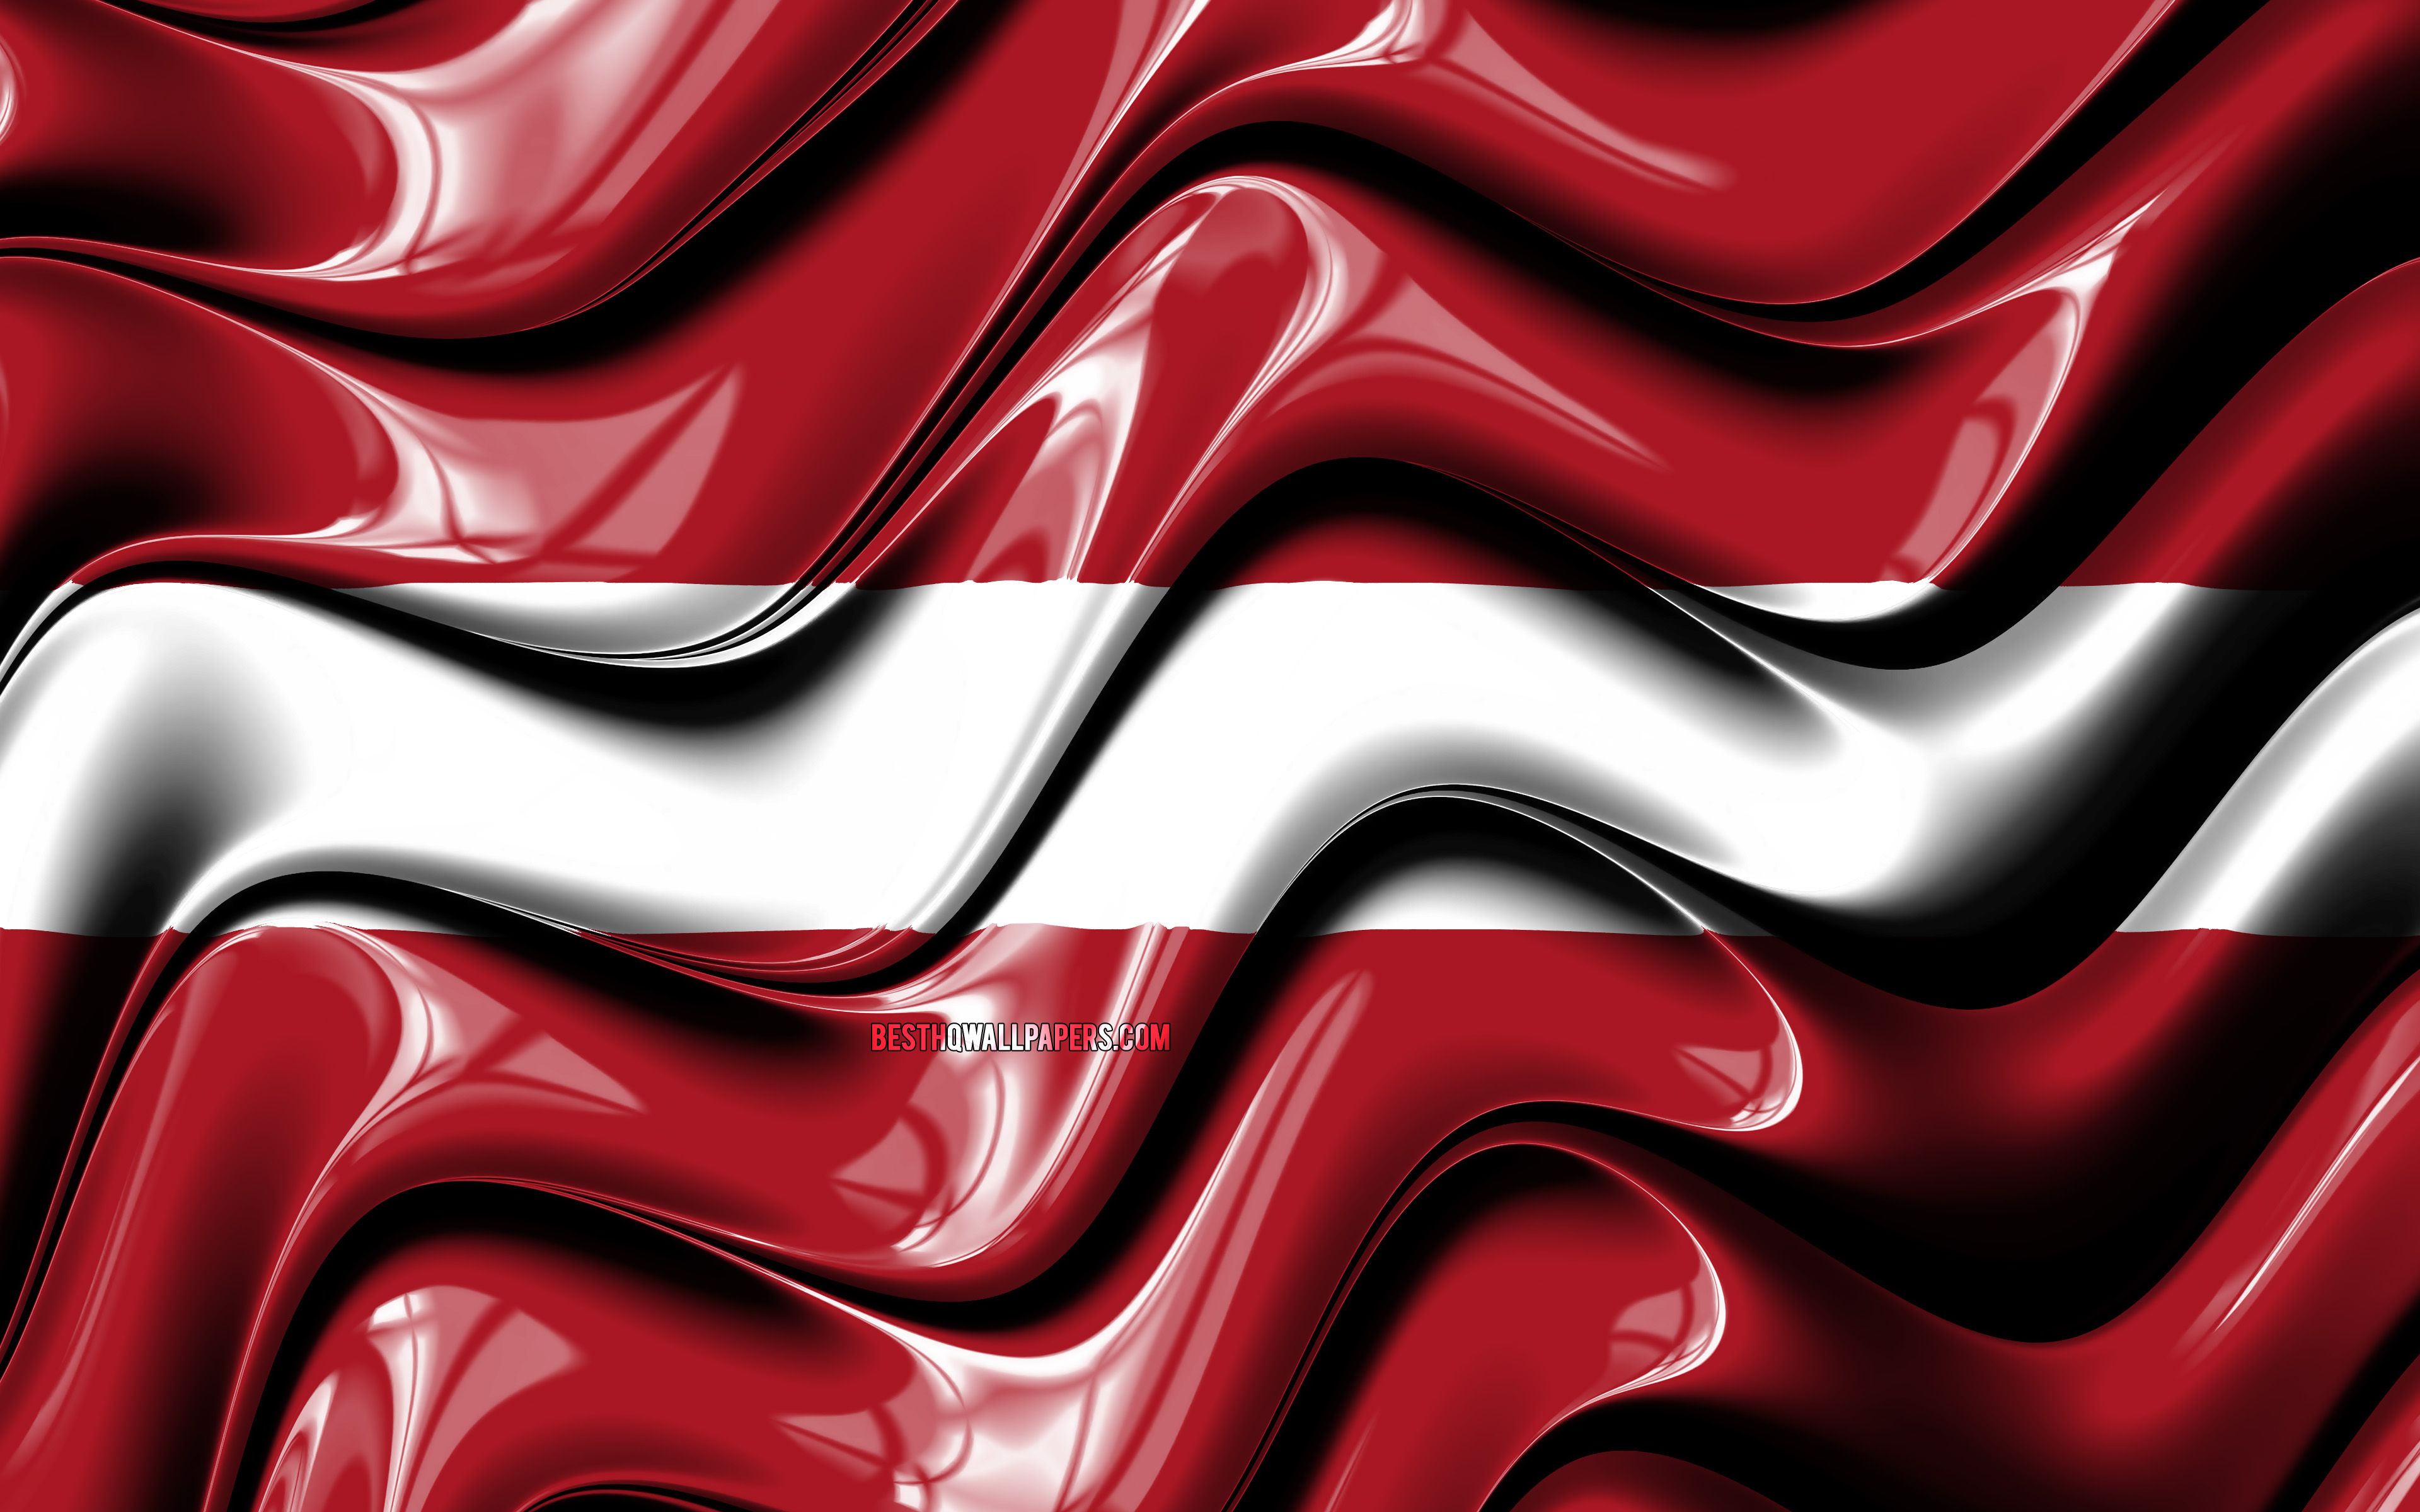 Download wallpaper Latvian flag, 4k, Europe, national symbols, Flag of Latvia, 3D art, Latvia, European countries, Latvia 3D flag for desktop with resolution 3840x2400. High Quality HD picture wallpaper